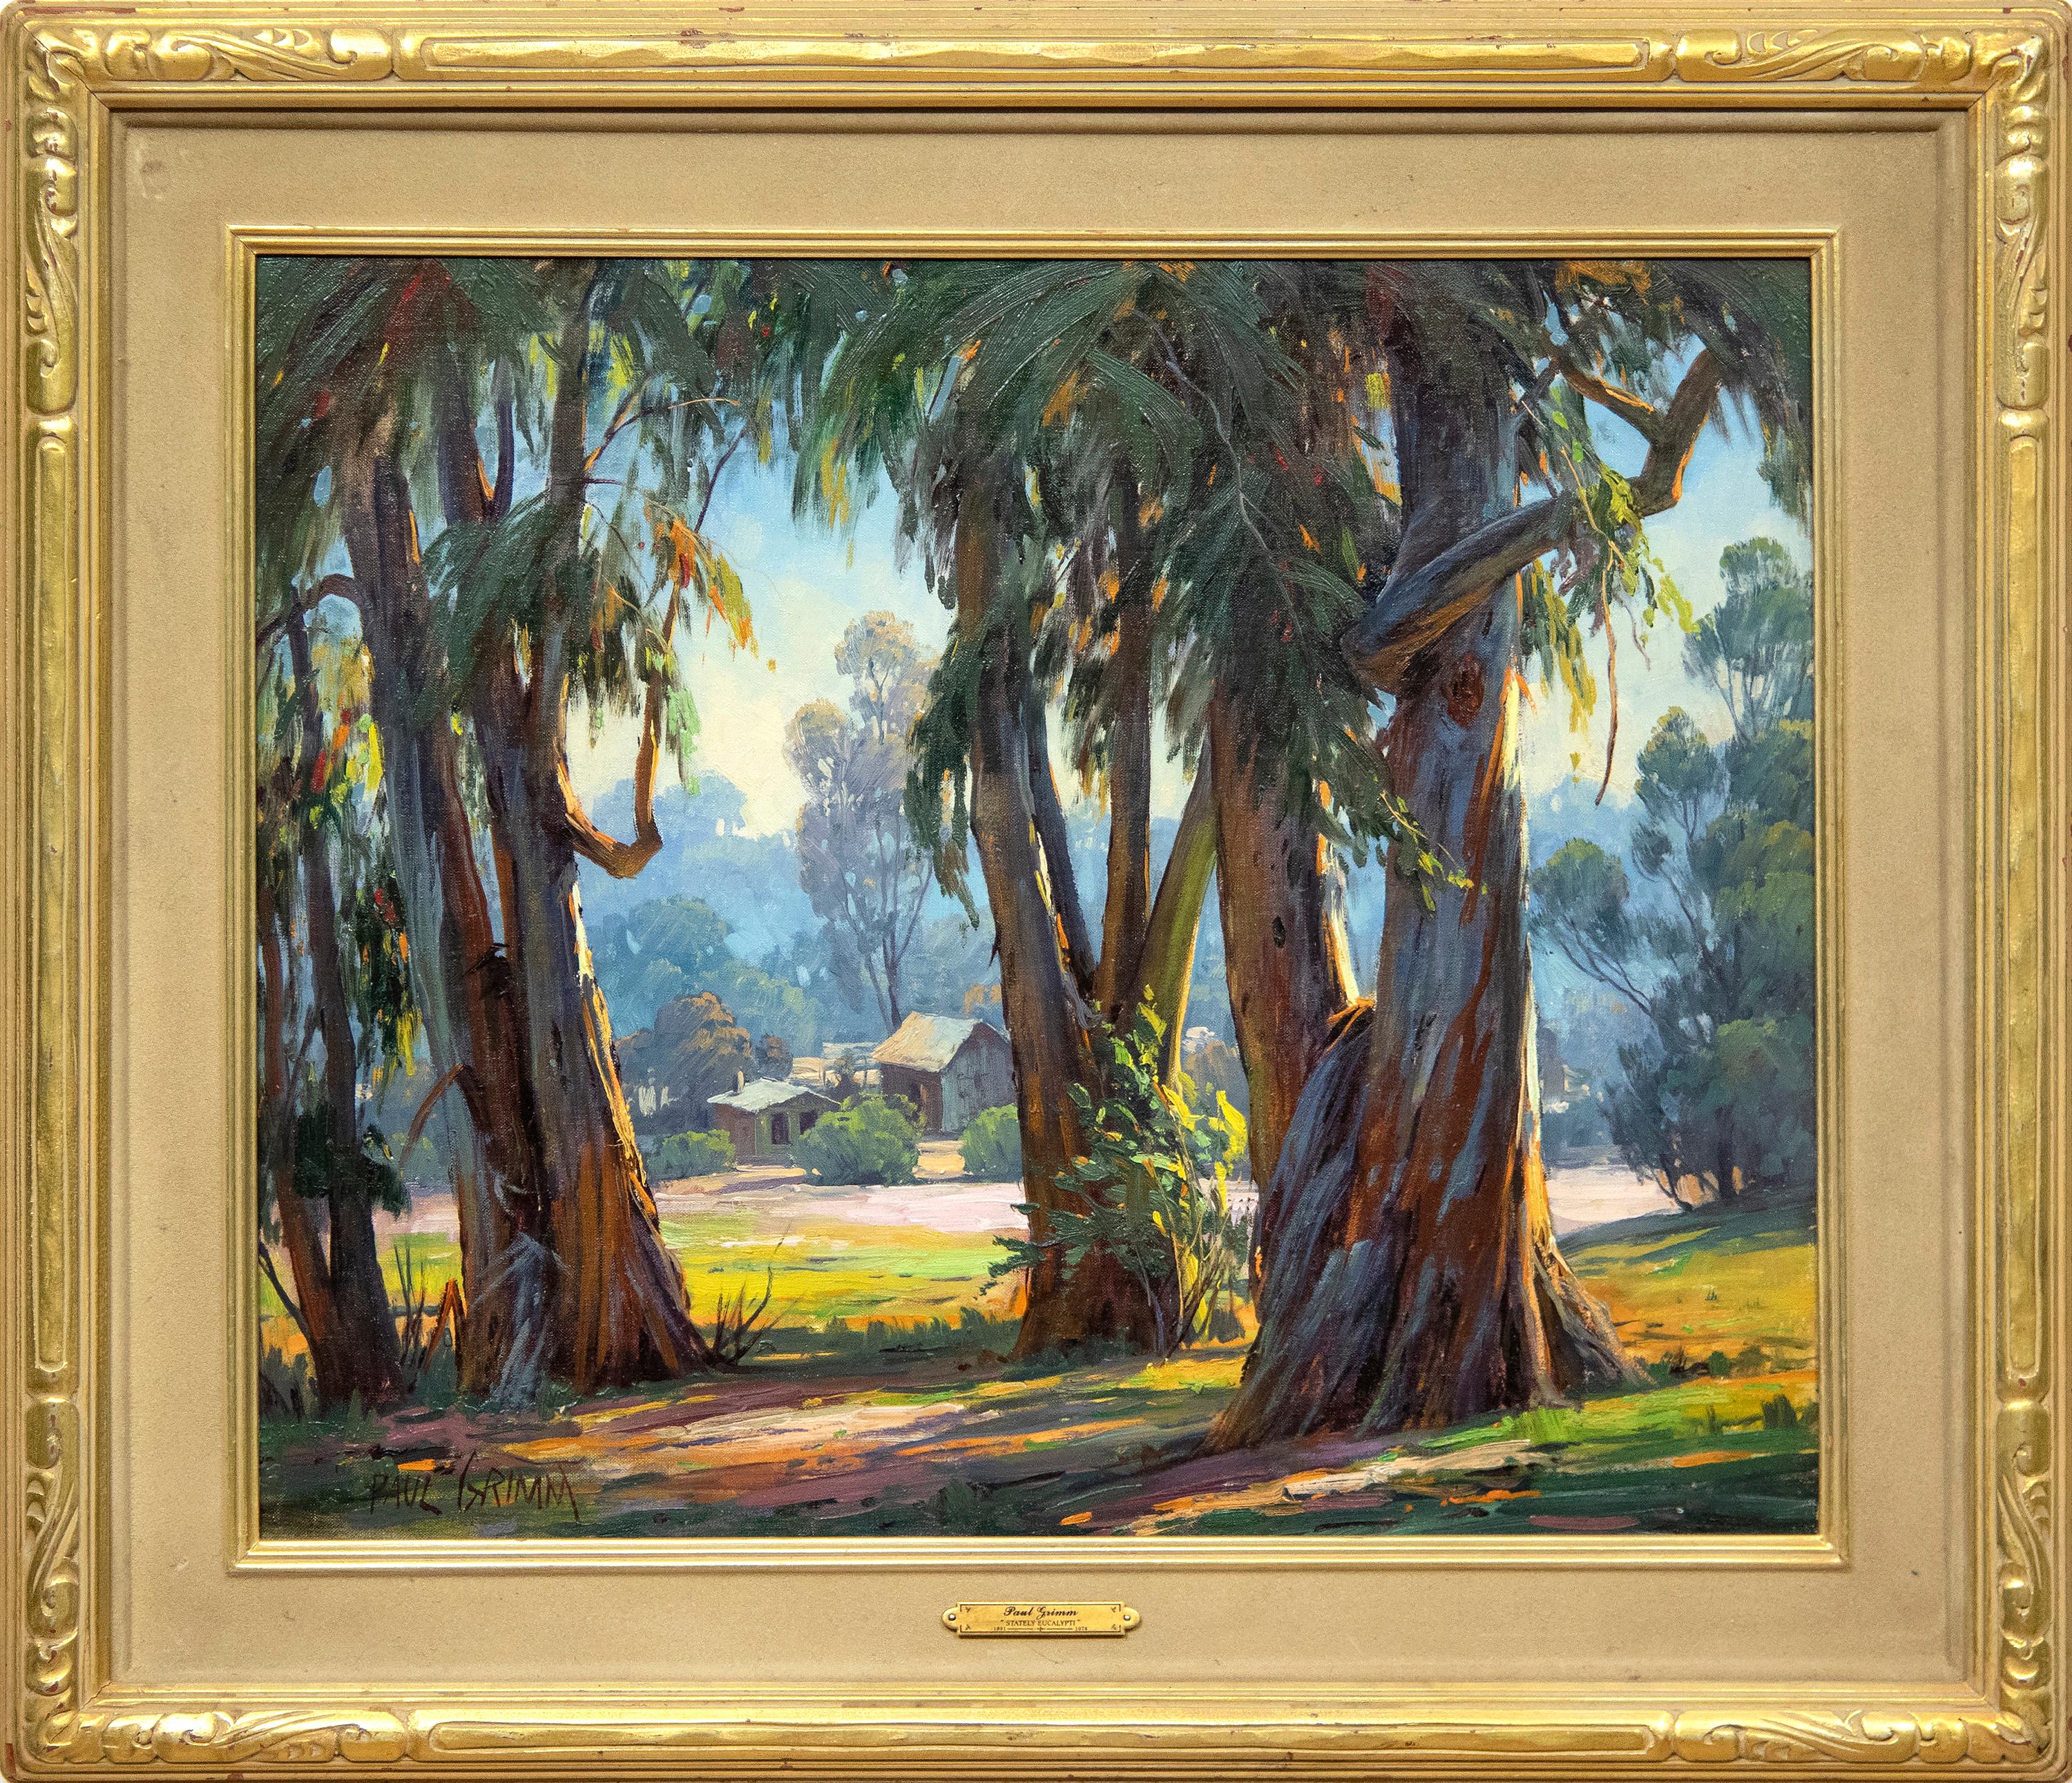 Stately Eucalypti - Painting by Paul Grimm